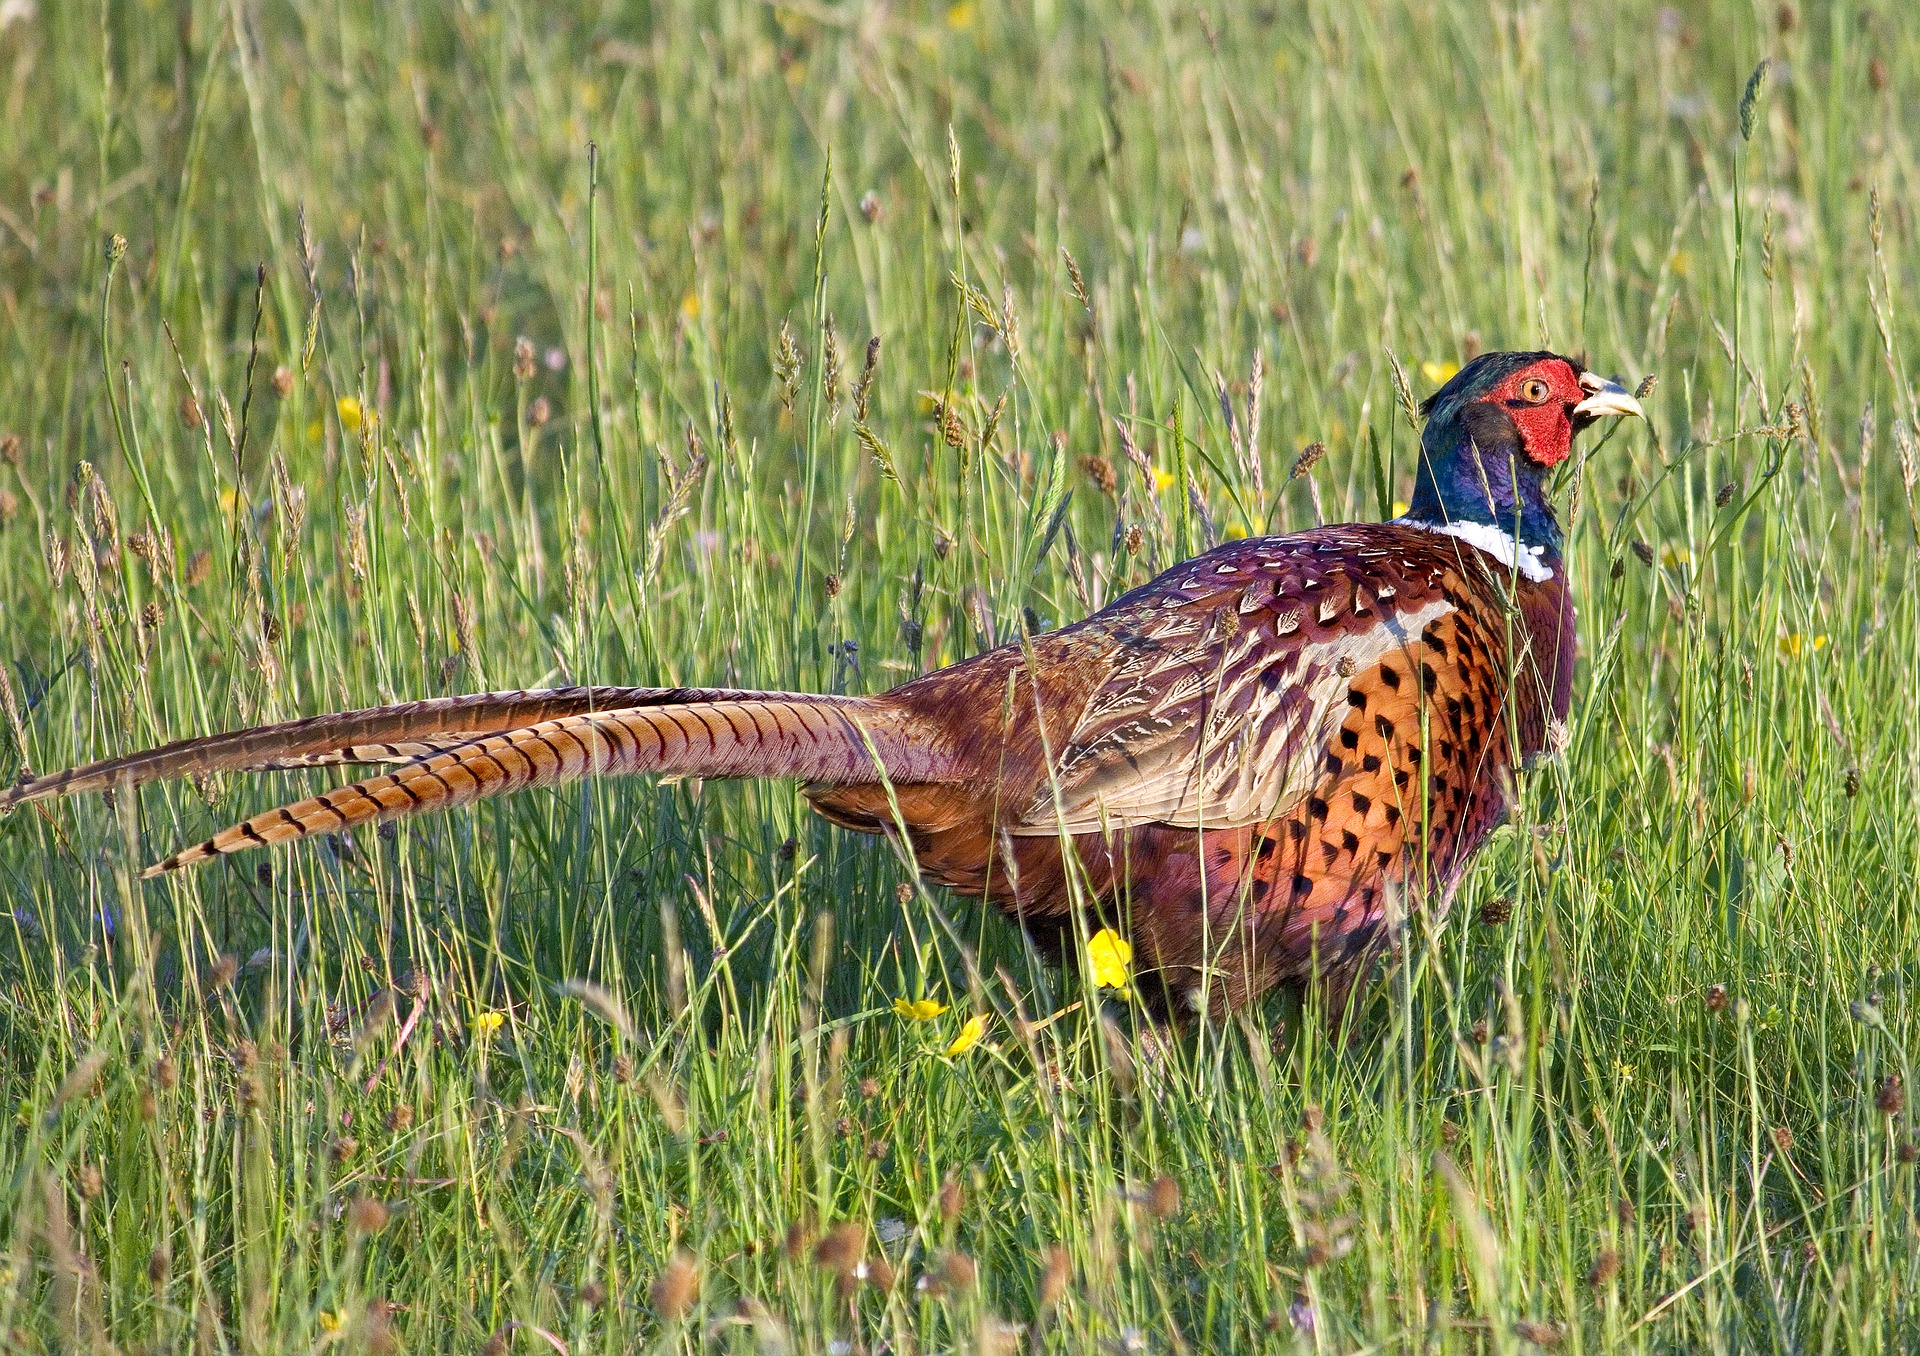 Pheasant sitting in a field of butter cups